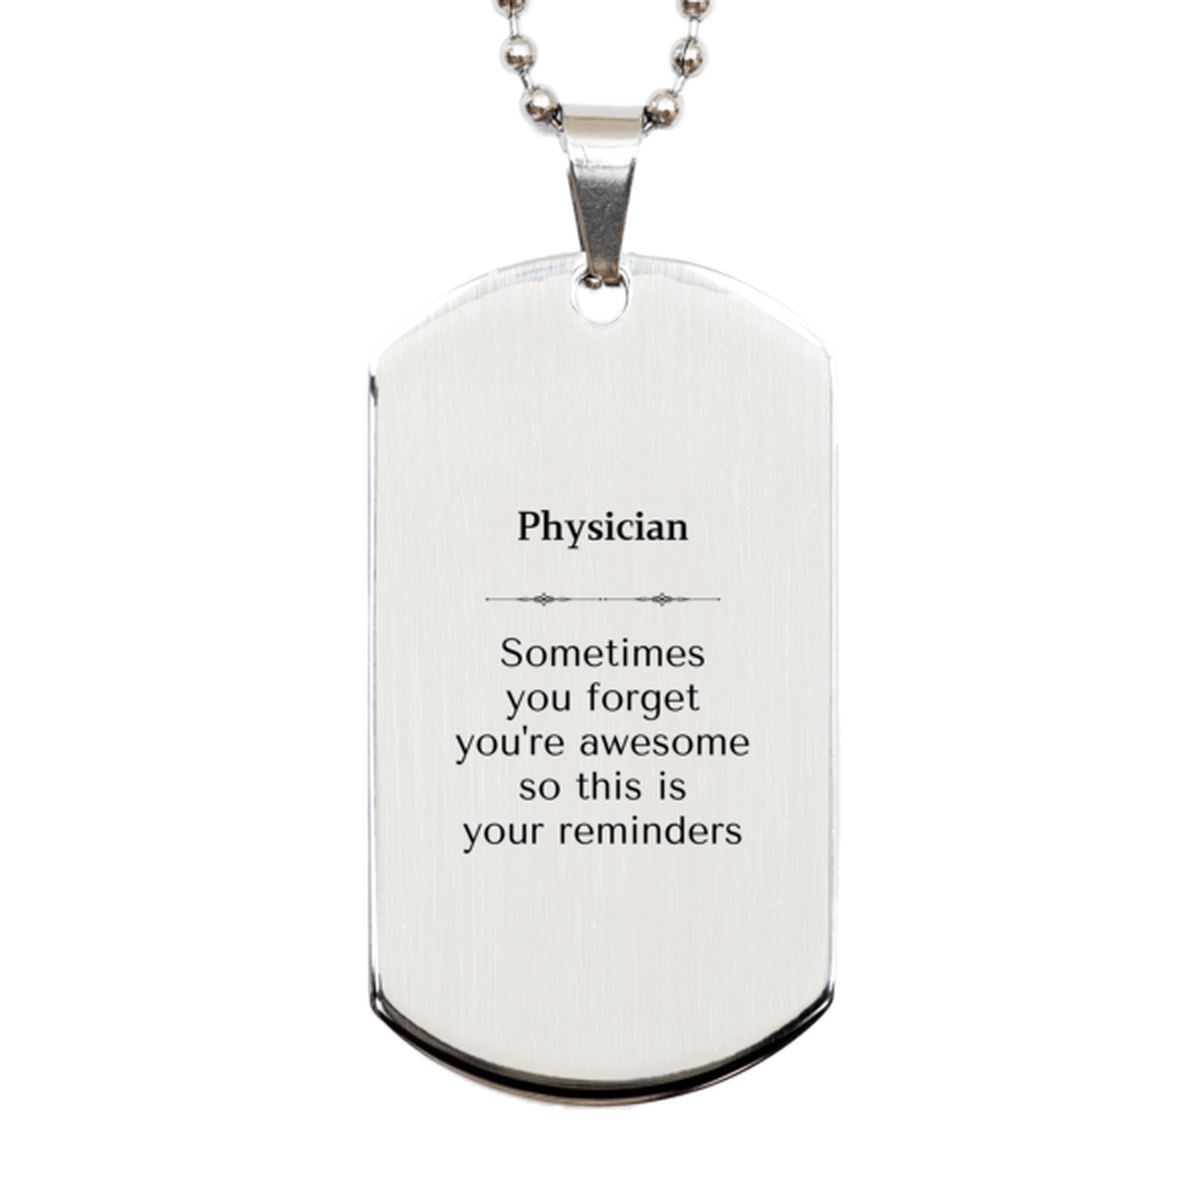 Sentimental Physician Silver Dog Tag, Physician Sometimes you forget you're awesome so this is your reminders, Graduation Christmas Birthday Gifts for Physician, Men, Women, Coworkers